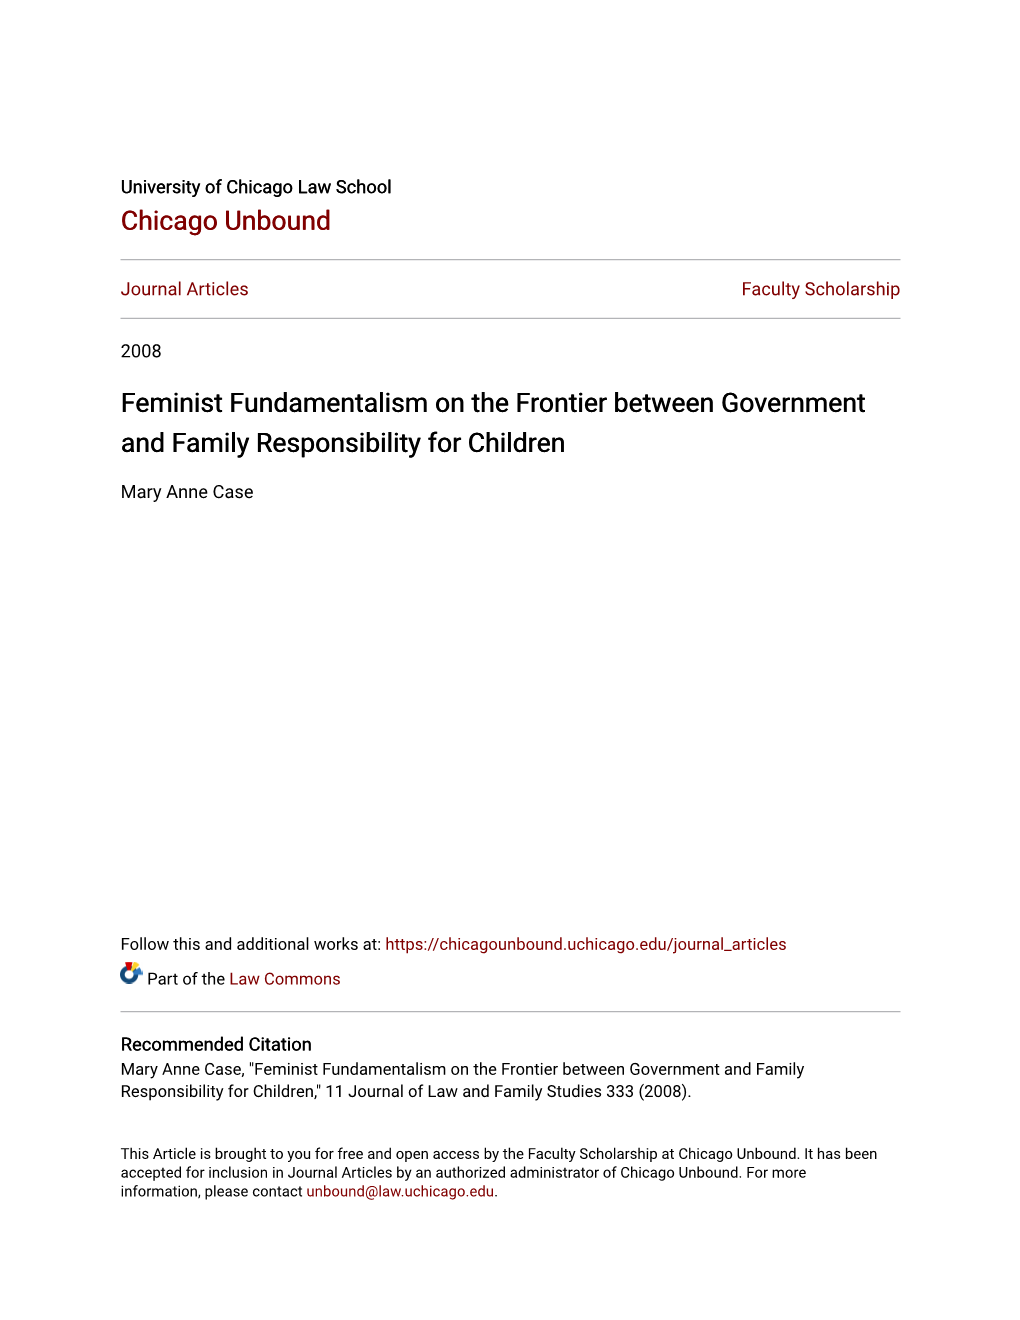 Feminist Fundamentalism on the Frontier Between Government and Family Responsibility for Children